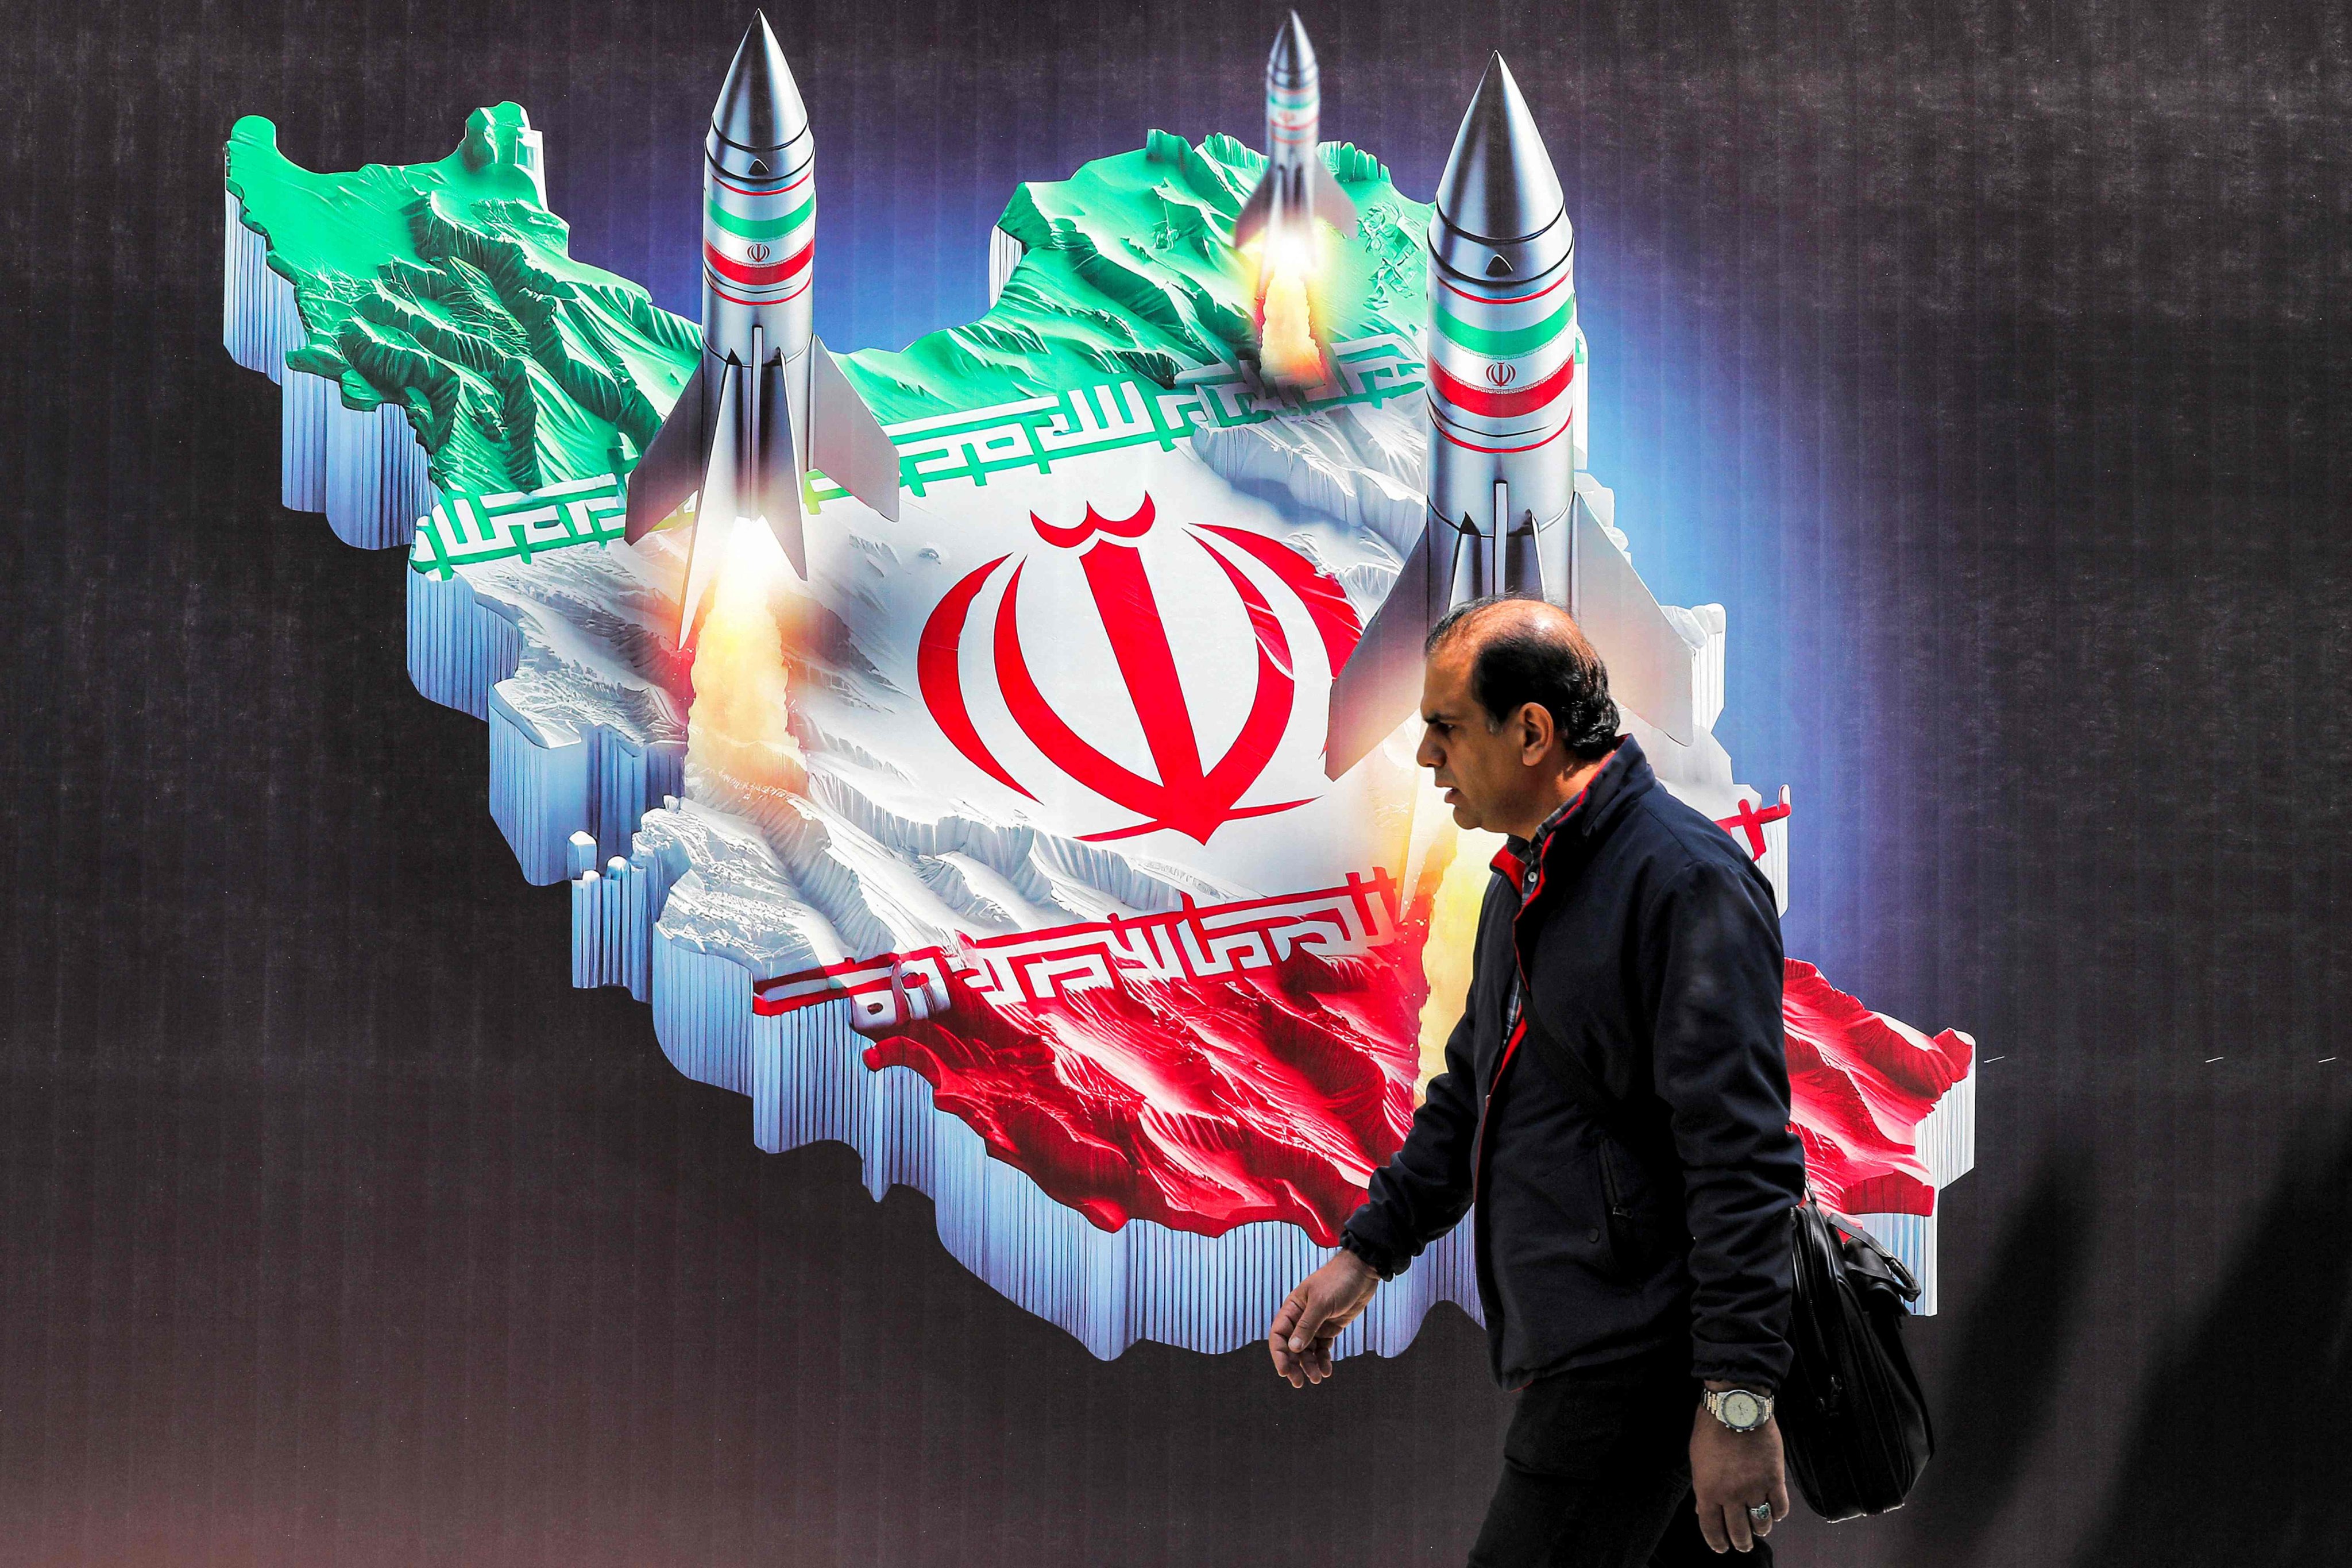  A man walks past a banner depicting missiles launching from a representation of the map of Iran coloured with the Iranian flag in central Tehran on April 15. Iran has urged Israel not to retaliate militarily to an unprecedented attack, which Tehran presented as a justified response to a deadly strike on its consulate building in Damascus. Photo: AFP